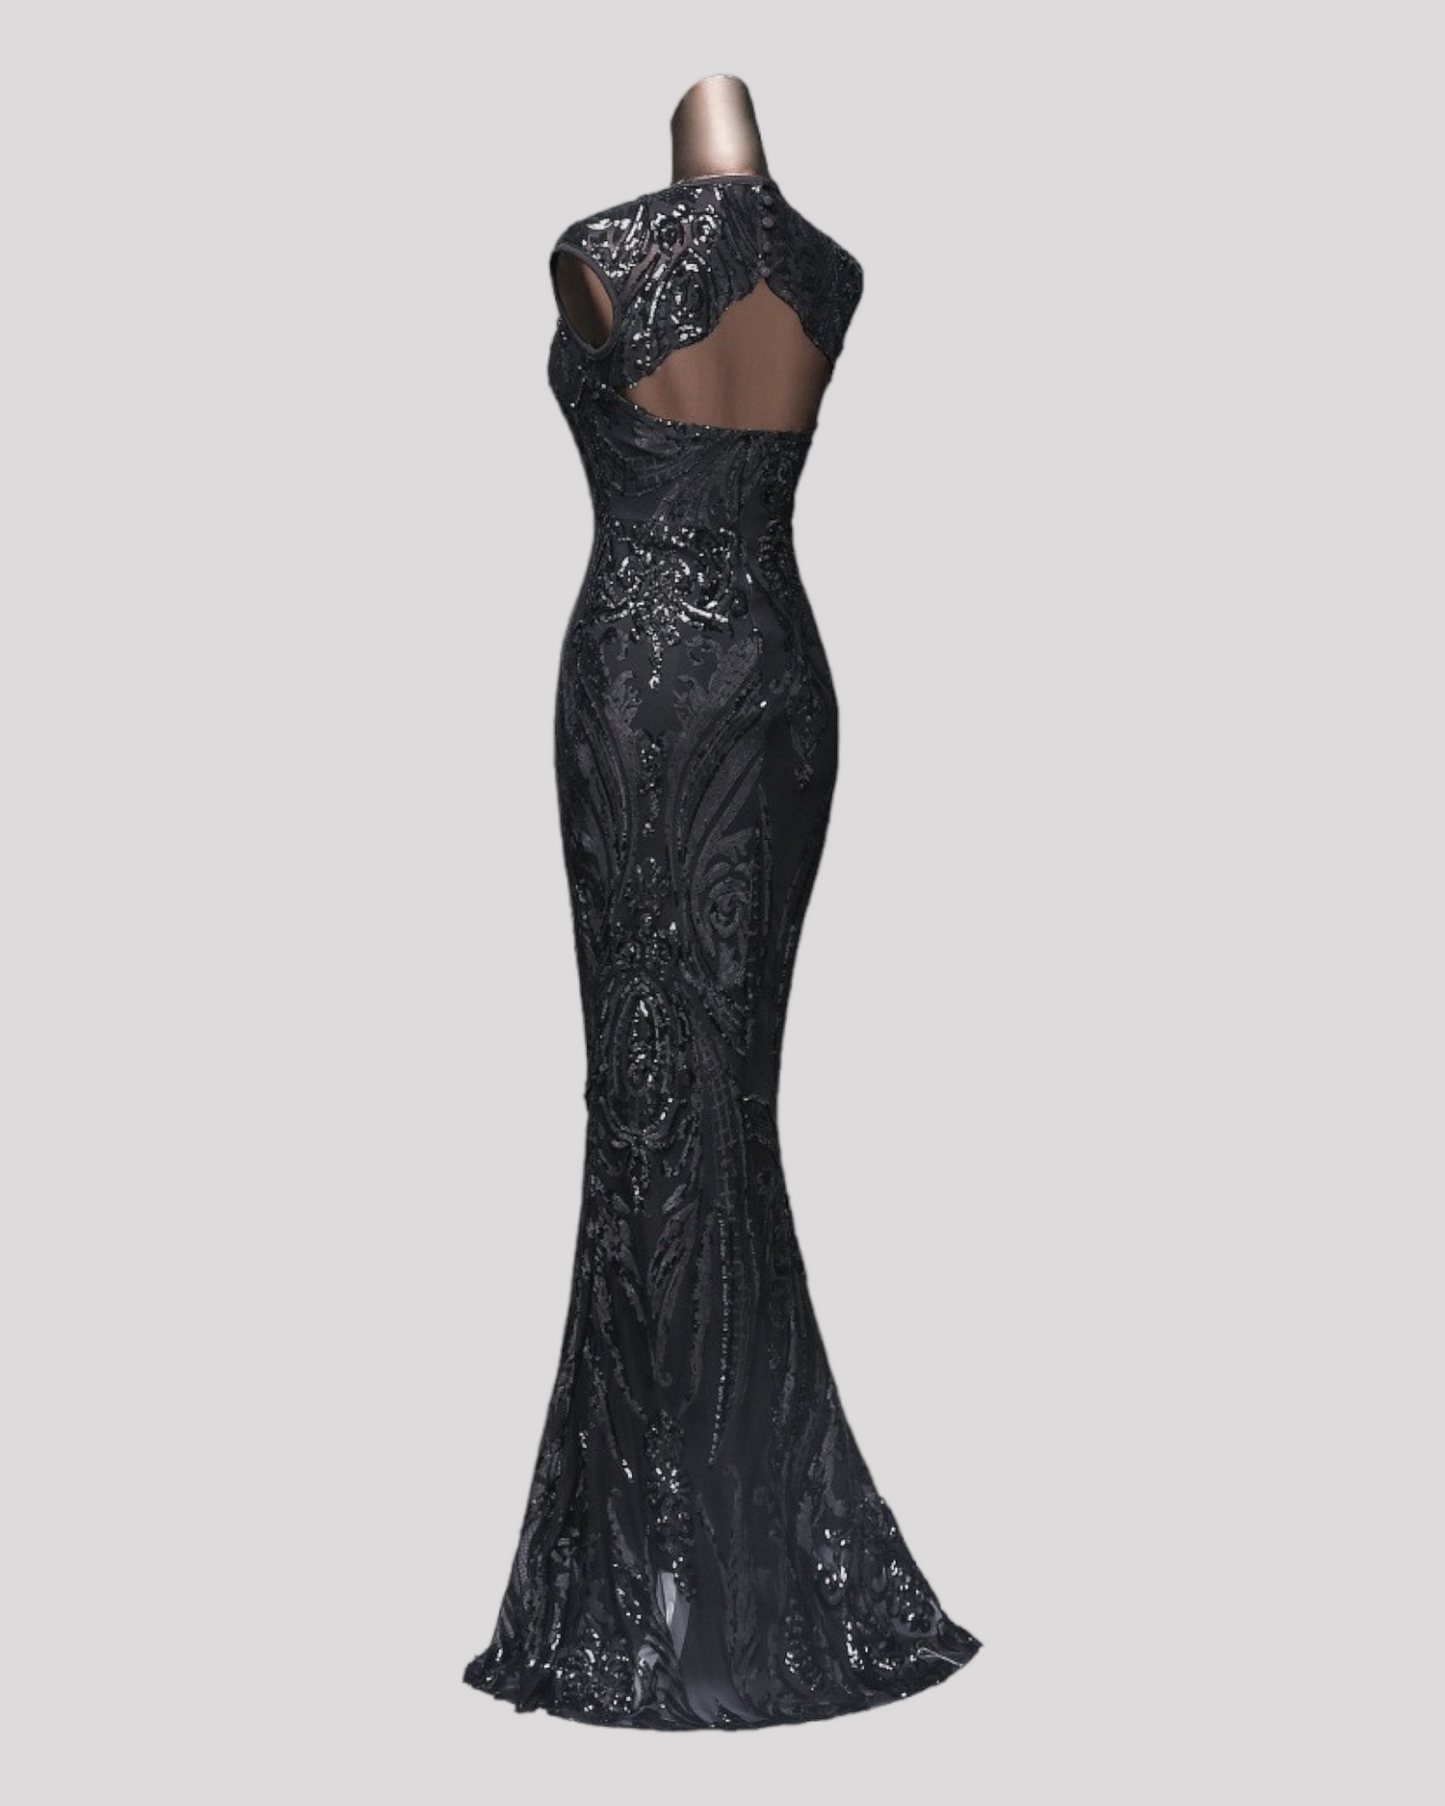 Beautiful Sequin Mermaid Style Evening Dress with high Neck and Cut out Back Feature